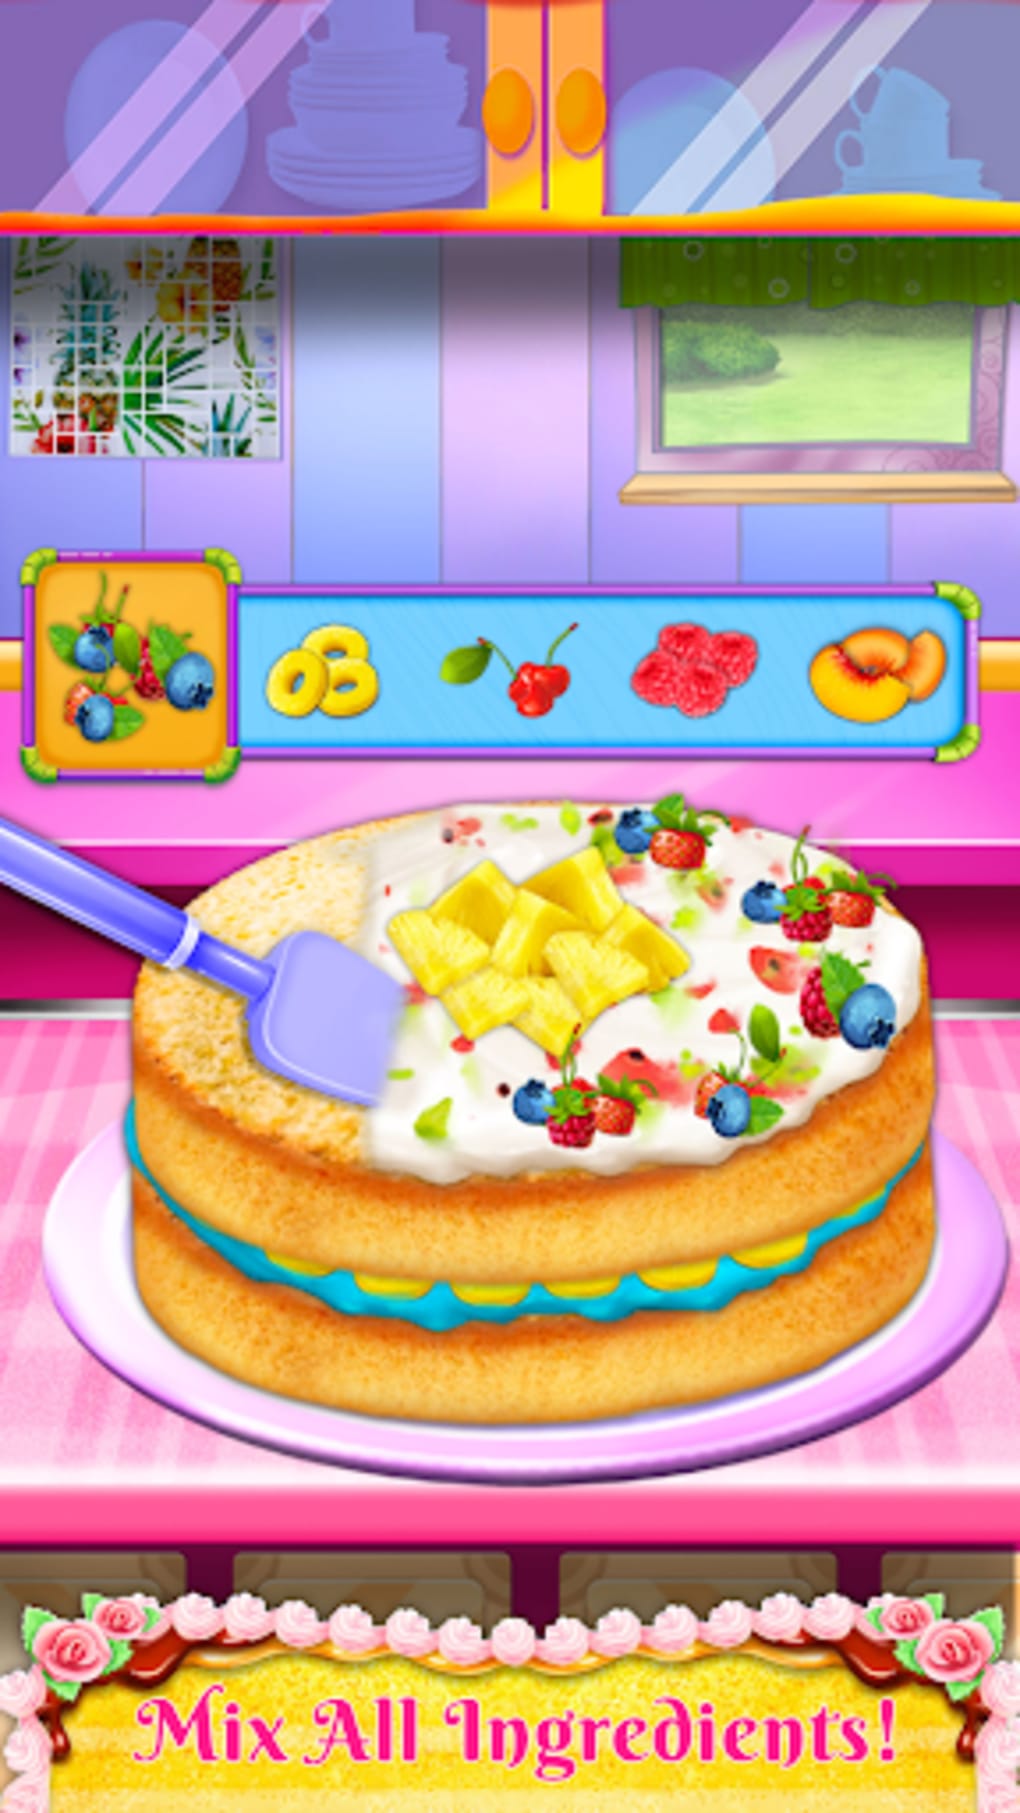 Fun 3D Cake Cooking Game My Bakery Empire Color, Decorate & Serve Cakes -  Magical Princess Cake - YouTube